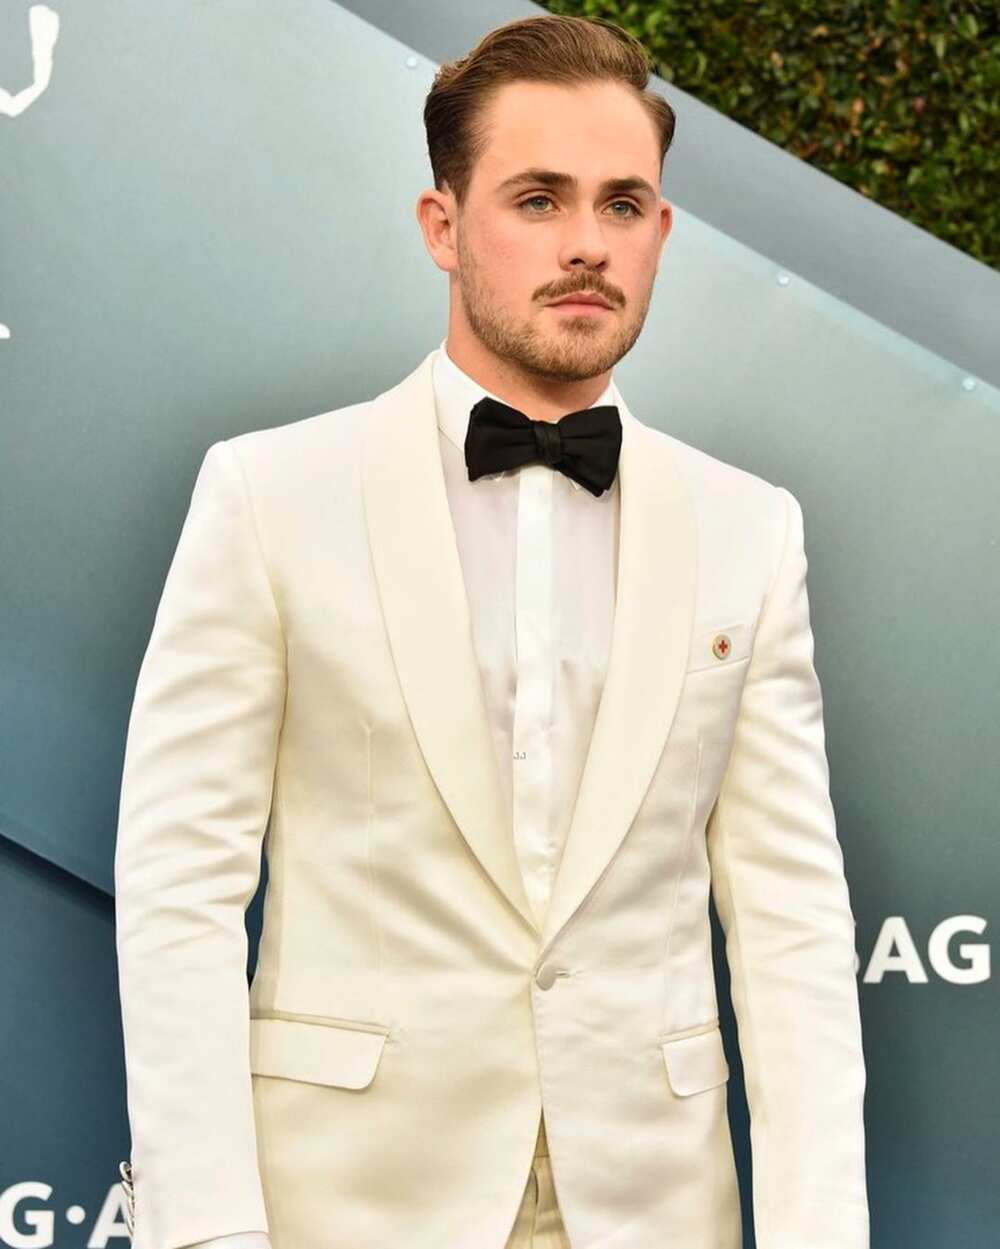 Dacre Montgomery bio: age, height, net worth, who is he dating?